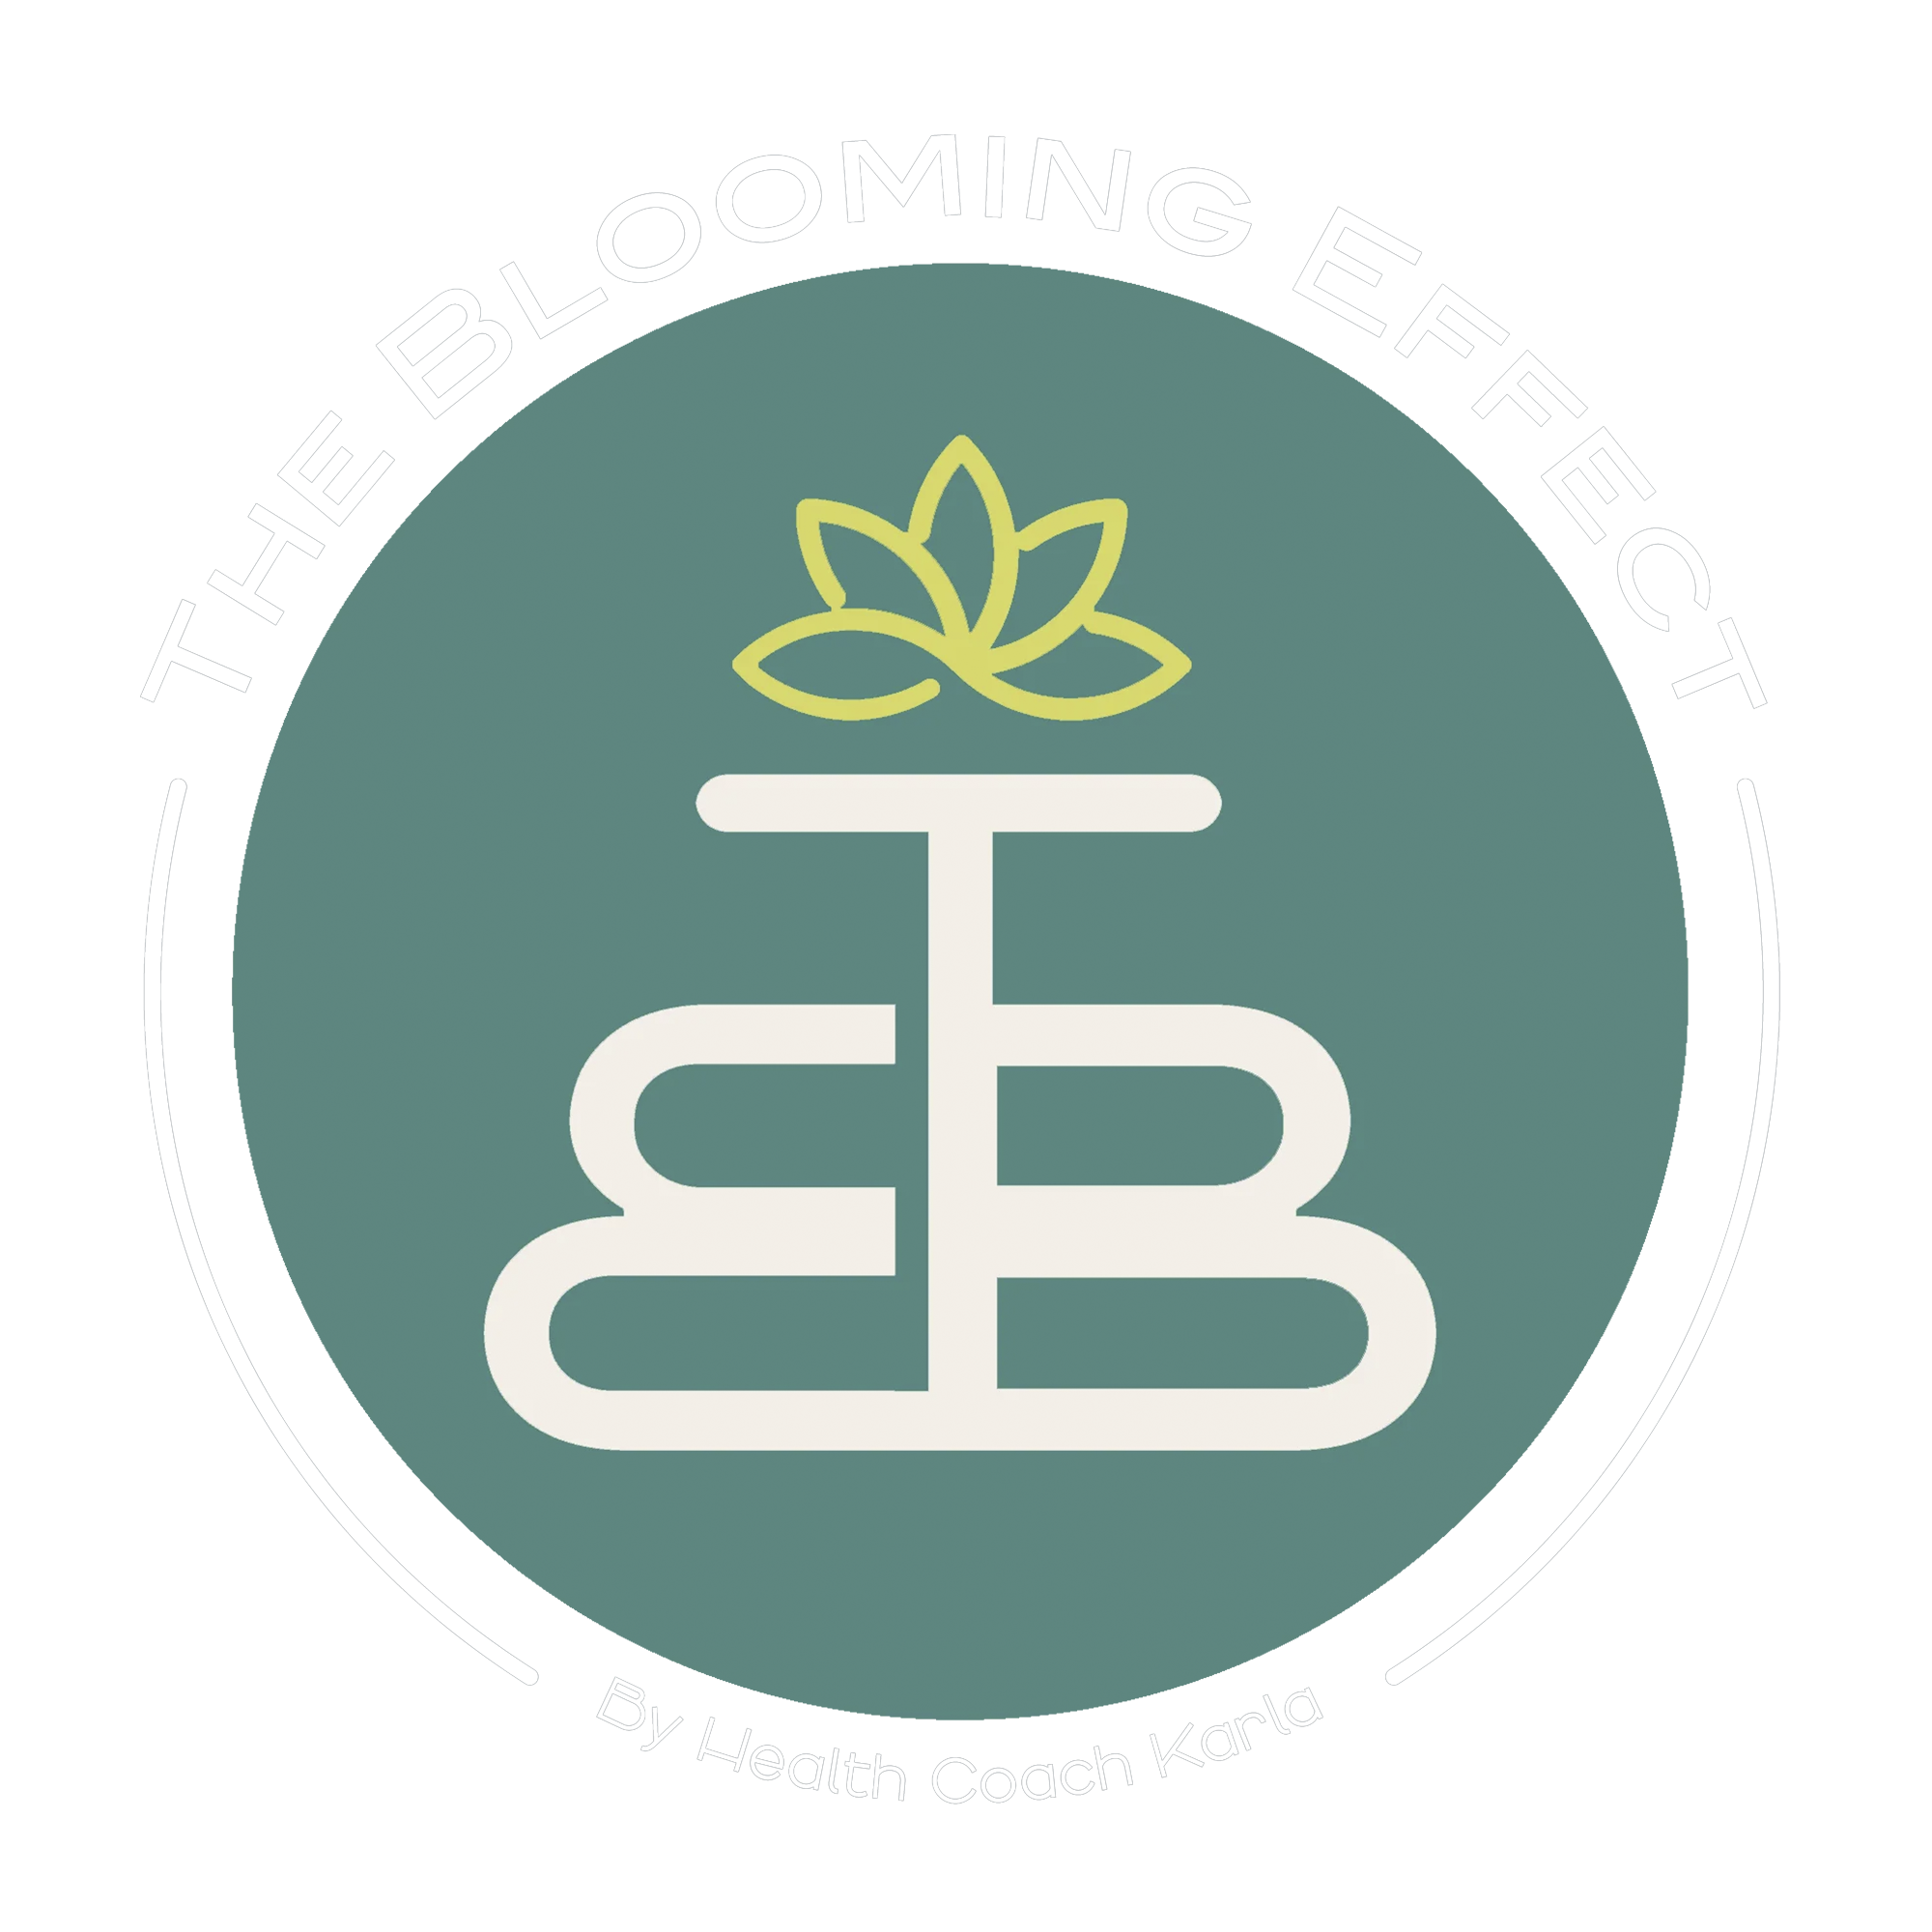 Nuestros Clientes The Blooming Effect